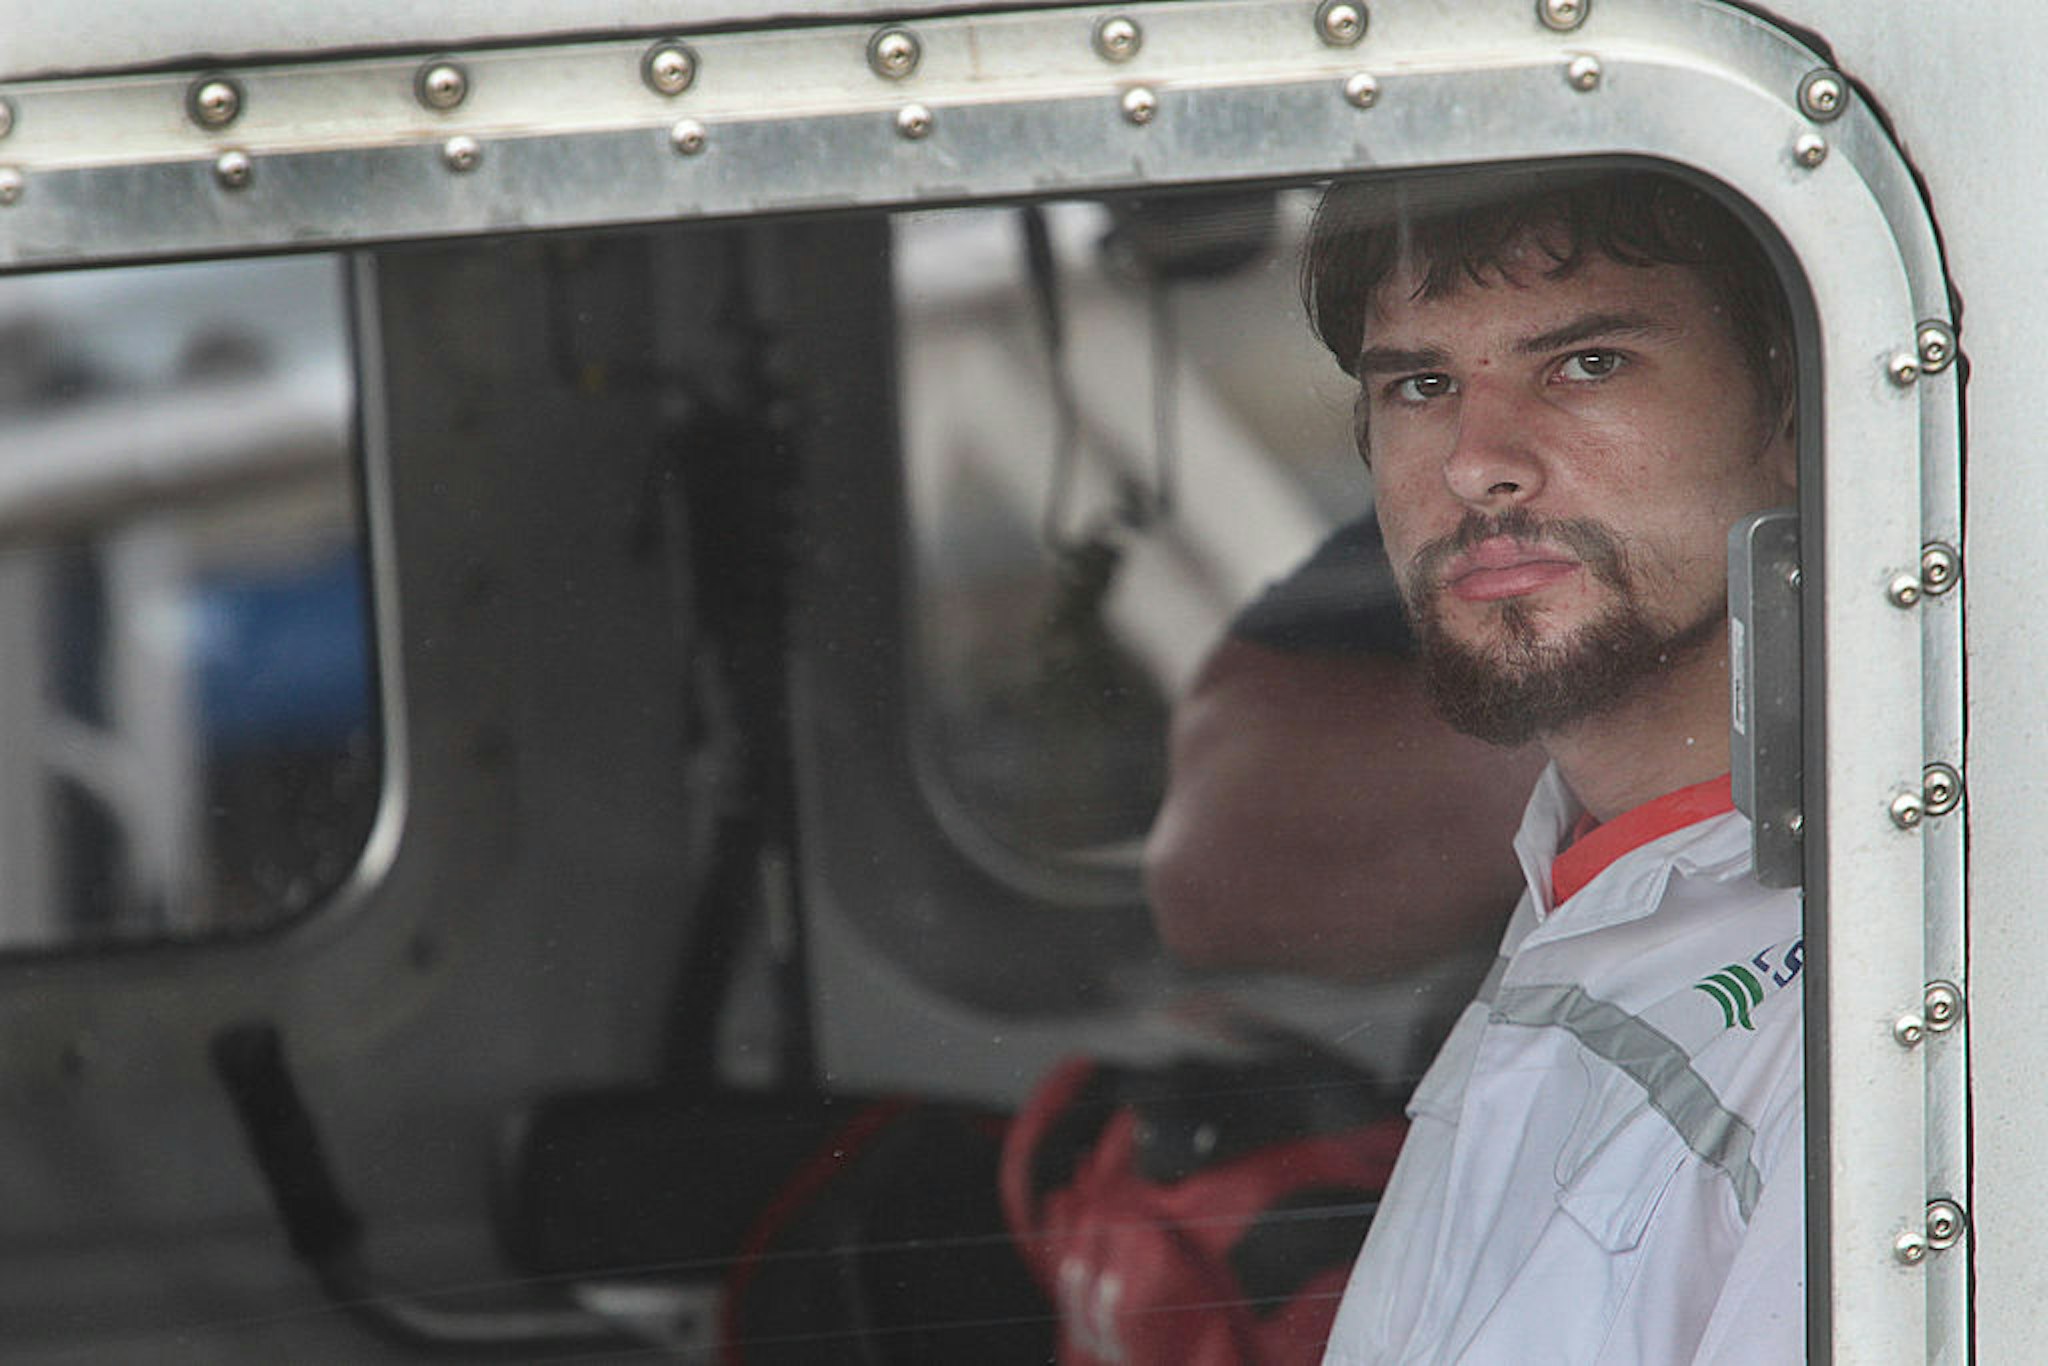 Nathan Carman arrives to the Coast Guard base in Boston on Sept. 27, 2016, after surviving the sinking of his 32-foot fishing boat near Block Canyon, off New York, in the Atlantic Ocean on Sept. 18.